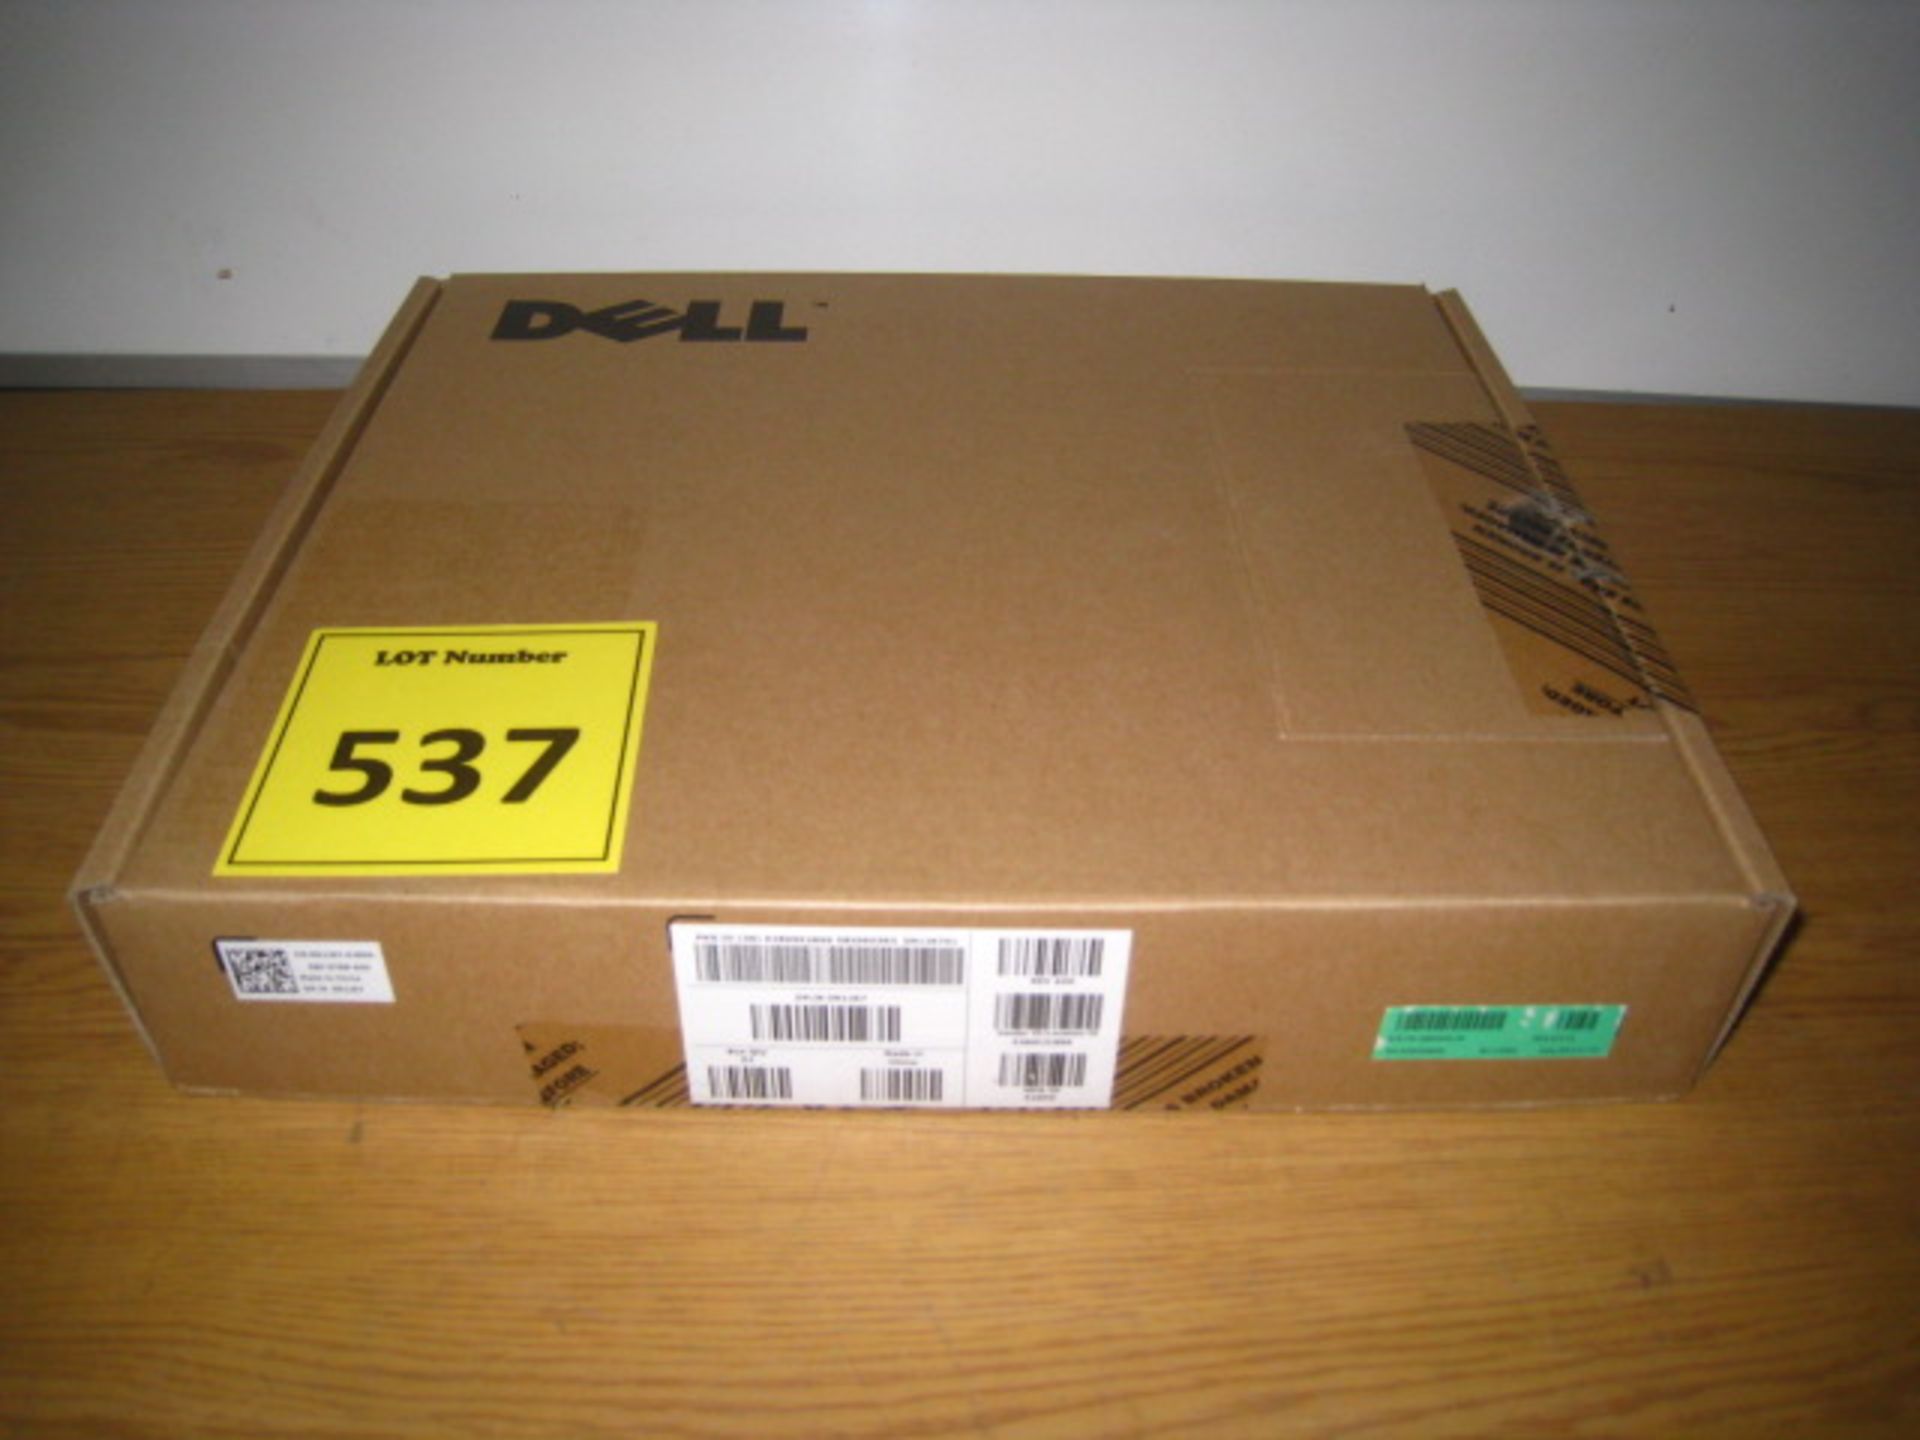 NEW & BOXED Dell Advanced USB 3.0 Laptop Docking Station Includes 130W Power Supply 0N1J67